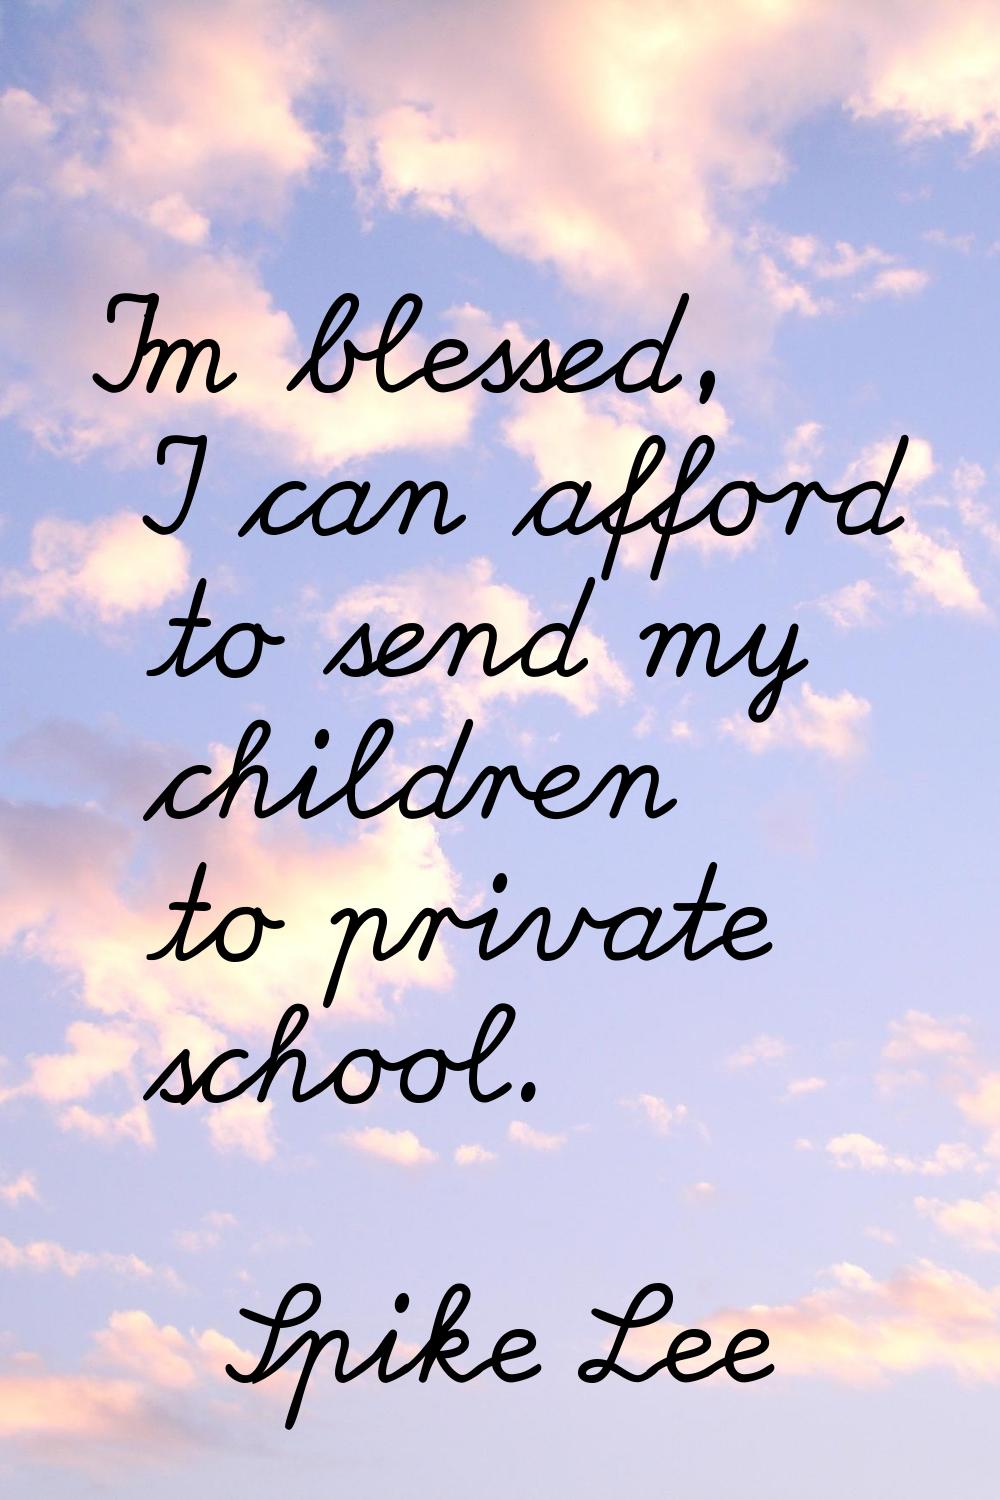 I'm blessed, I can afford to send my children to private school.